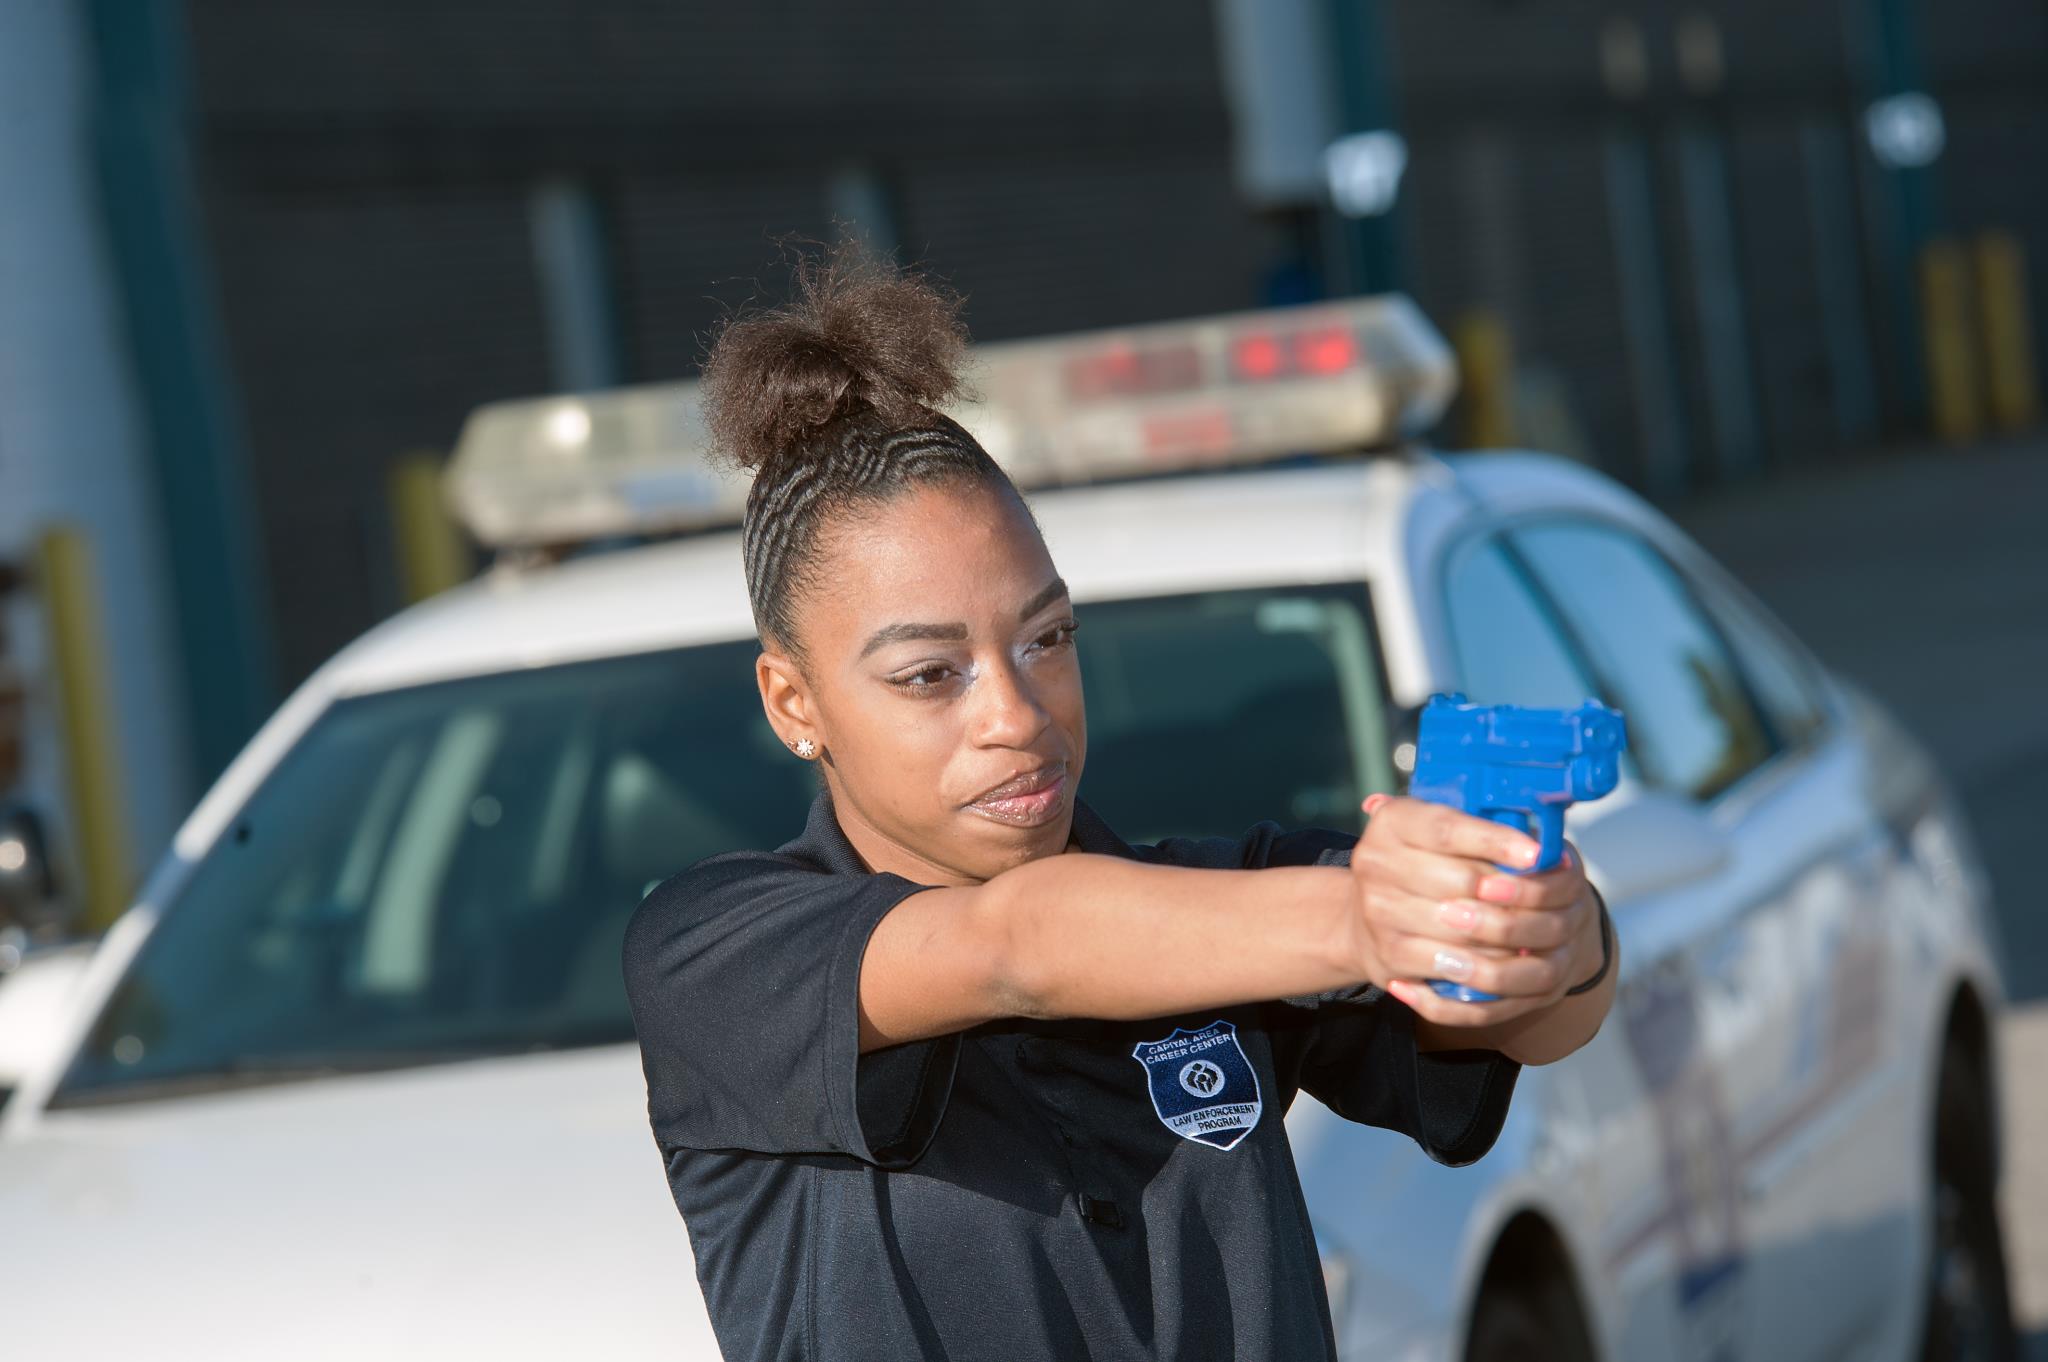 Female Law Enforcement student practices her shooting skills